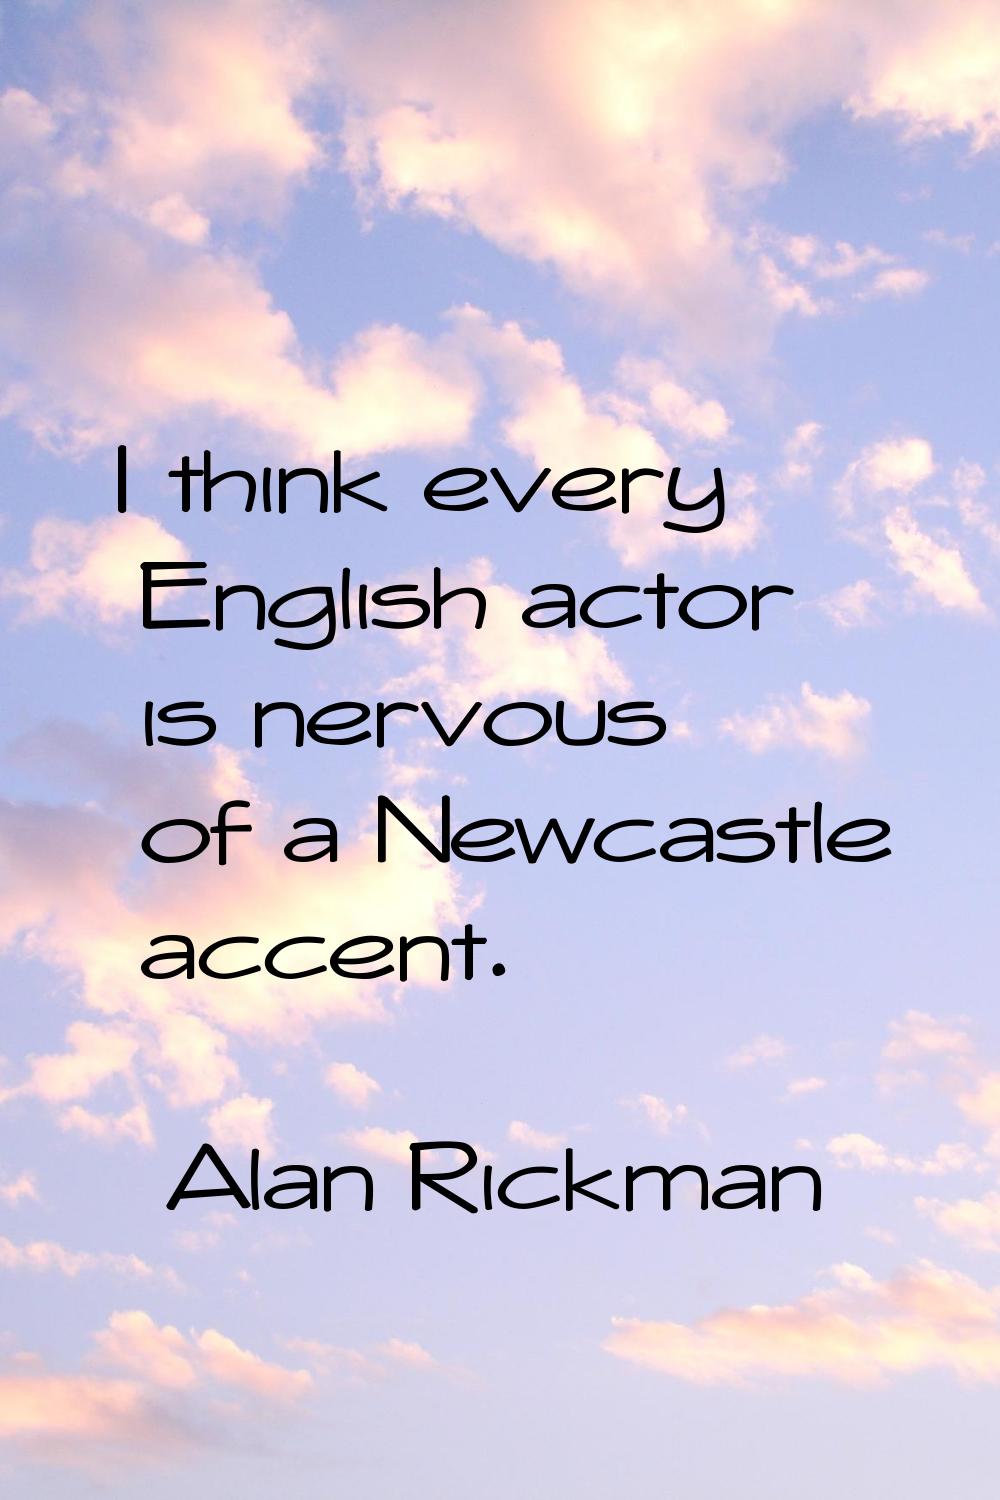 I think every English actor is nervous of a Newcastle accent.